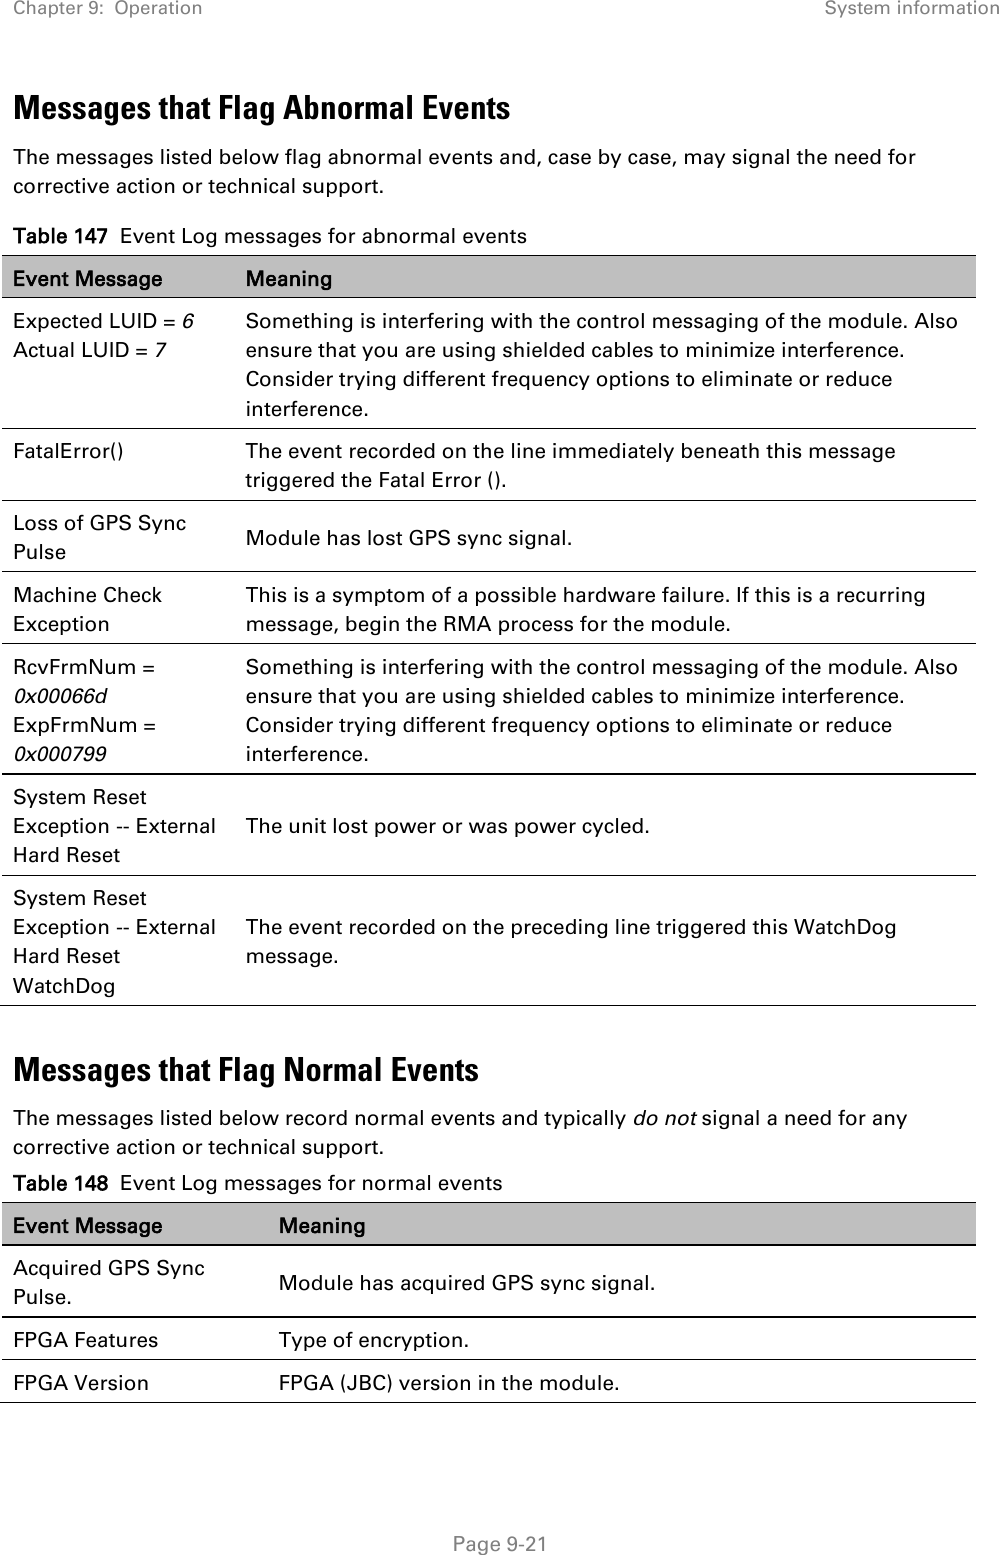 Chapter 9:  Operation System information   Page 9-21 Messages that Flag Abnormal Events The messages listed below flag abnormal events and, case by case, may signal the need for corrective action or technical support.  Table 147  Event Log messages for abnormal events Event Message Meaning Expected LUID = 6             Actual LUID = 7 Something is interfering with the control messaging of the module. Also ensure that you are using shielded cables to minimize interference. Consider trying different frequency options to eliminate or reduce interference. FatalError() The event recorded on the line immediately beneath this message triggered the Fatal Error (). Loss of GPS Sync Pulse Module has lost GPS sync signal. Machine Check Exception This is a symptom of a possible hardware failure. If this is a recurring message, begin the RMA process for the module. RcvFrmNum = 0x00066d ExpFrmNum = 0x000799 Something is interfering with the control messaging of the module. Also ensure that you are using shielded cables to minimize interference. Consider trying different frequency options to eliminate or reduce interference. System Reset Exception -- External Hard Reset The unit lost power or was power cycled. System Reset Exception -- External Hard Reset WatchDog The event recorded on the preceding line triggered this WatchDog message.  Messages that Flag Normal Events The messages listed below record normal events and typically do not signal a need for any corrective action or technical support. Table 148  Event Log messages for normal events Event Message Meaning Acquired GPS Sync Pulse. Module has acquired GPS sync signal. FPGA Features Type of encryption. FPGA Version FPGA (JBC) version in the module. 